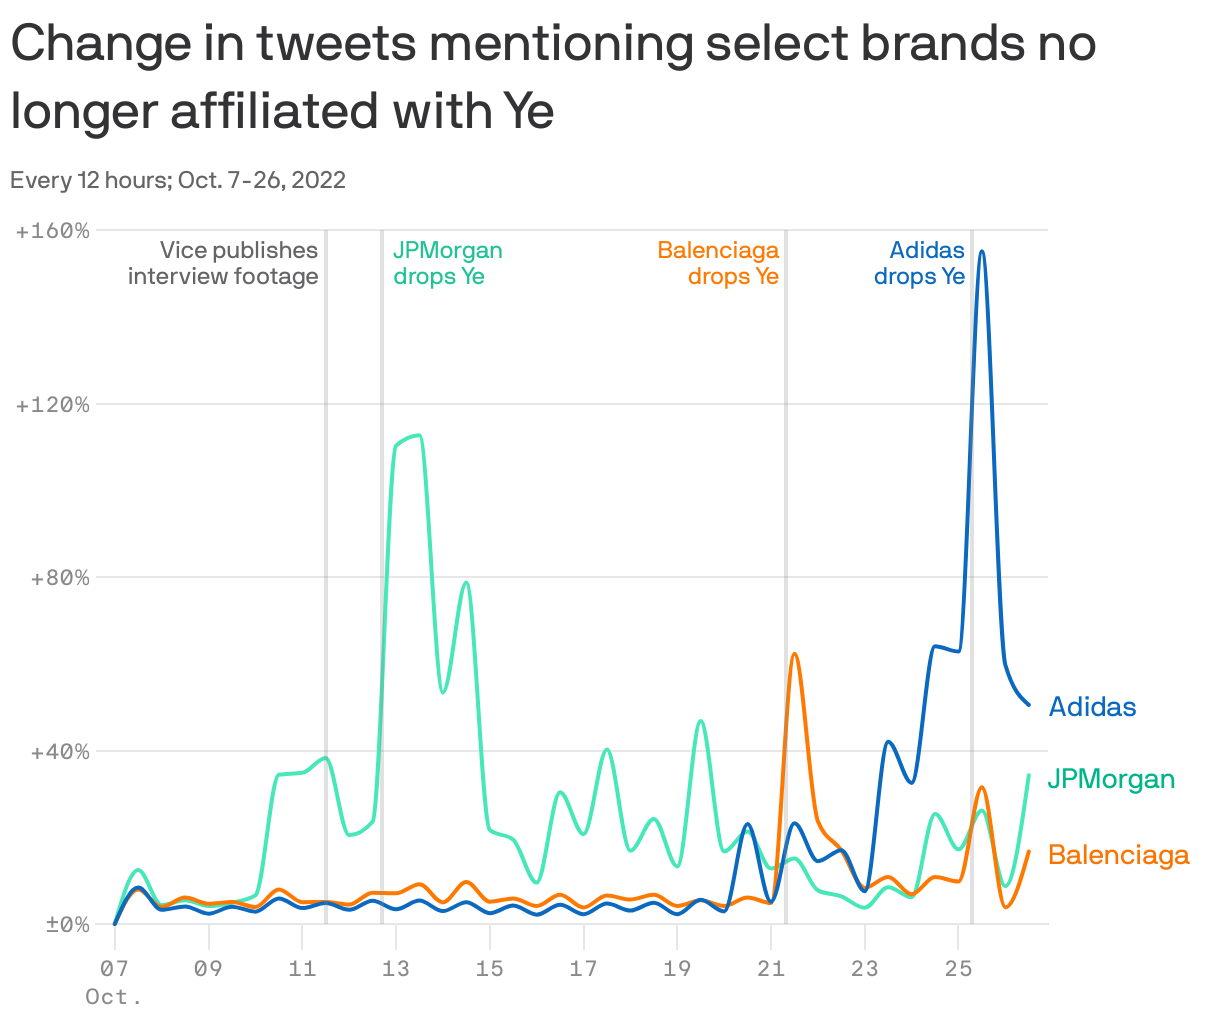 Change in tweets mentioning select brands no longer affiliated with Ye